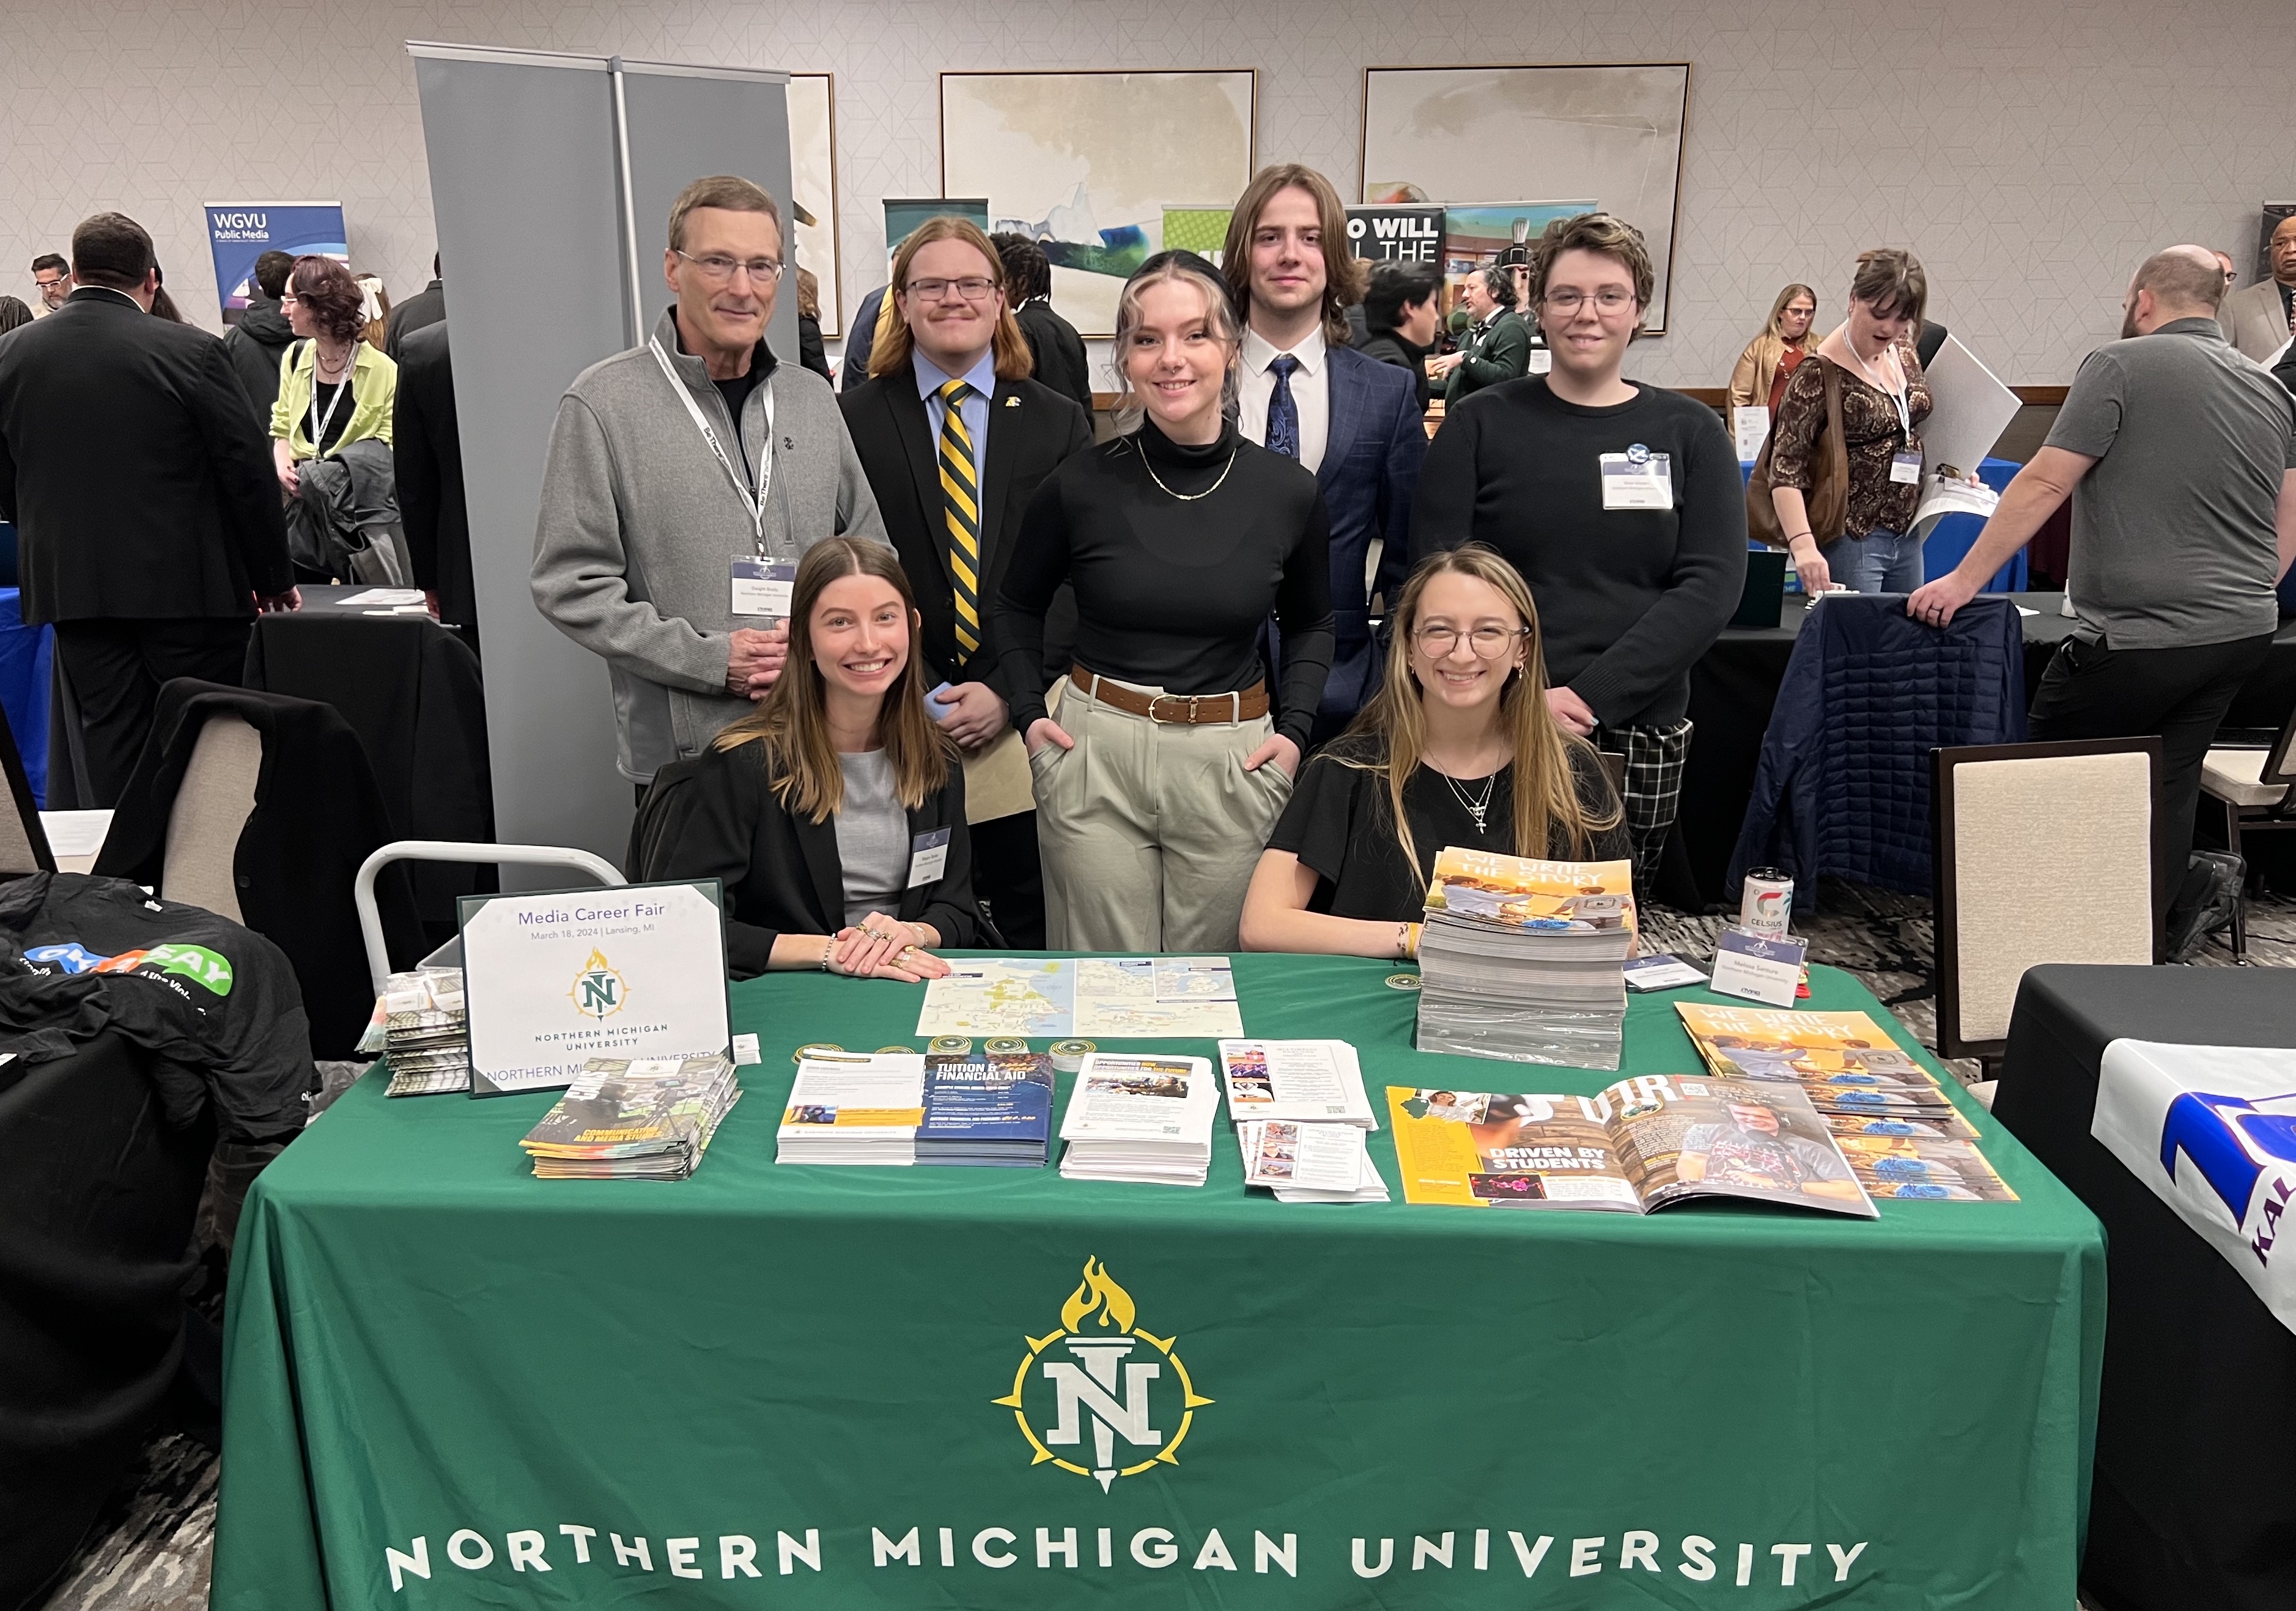 Part of the NMU delegation at the college/career fair.